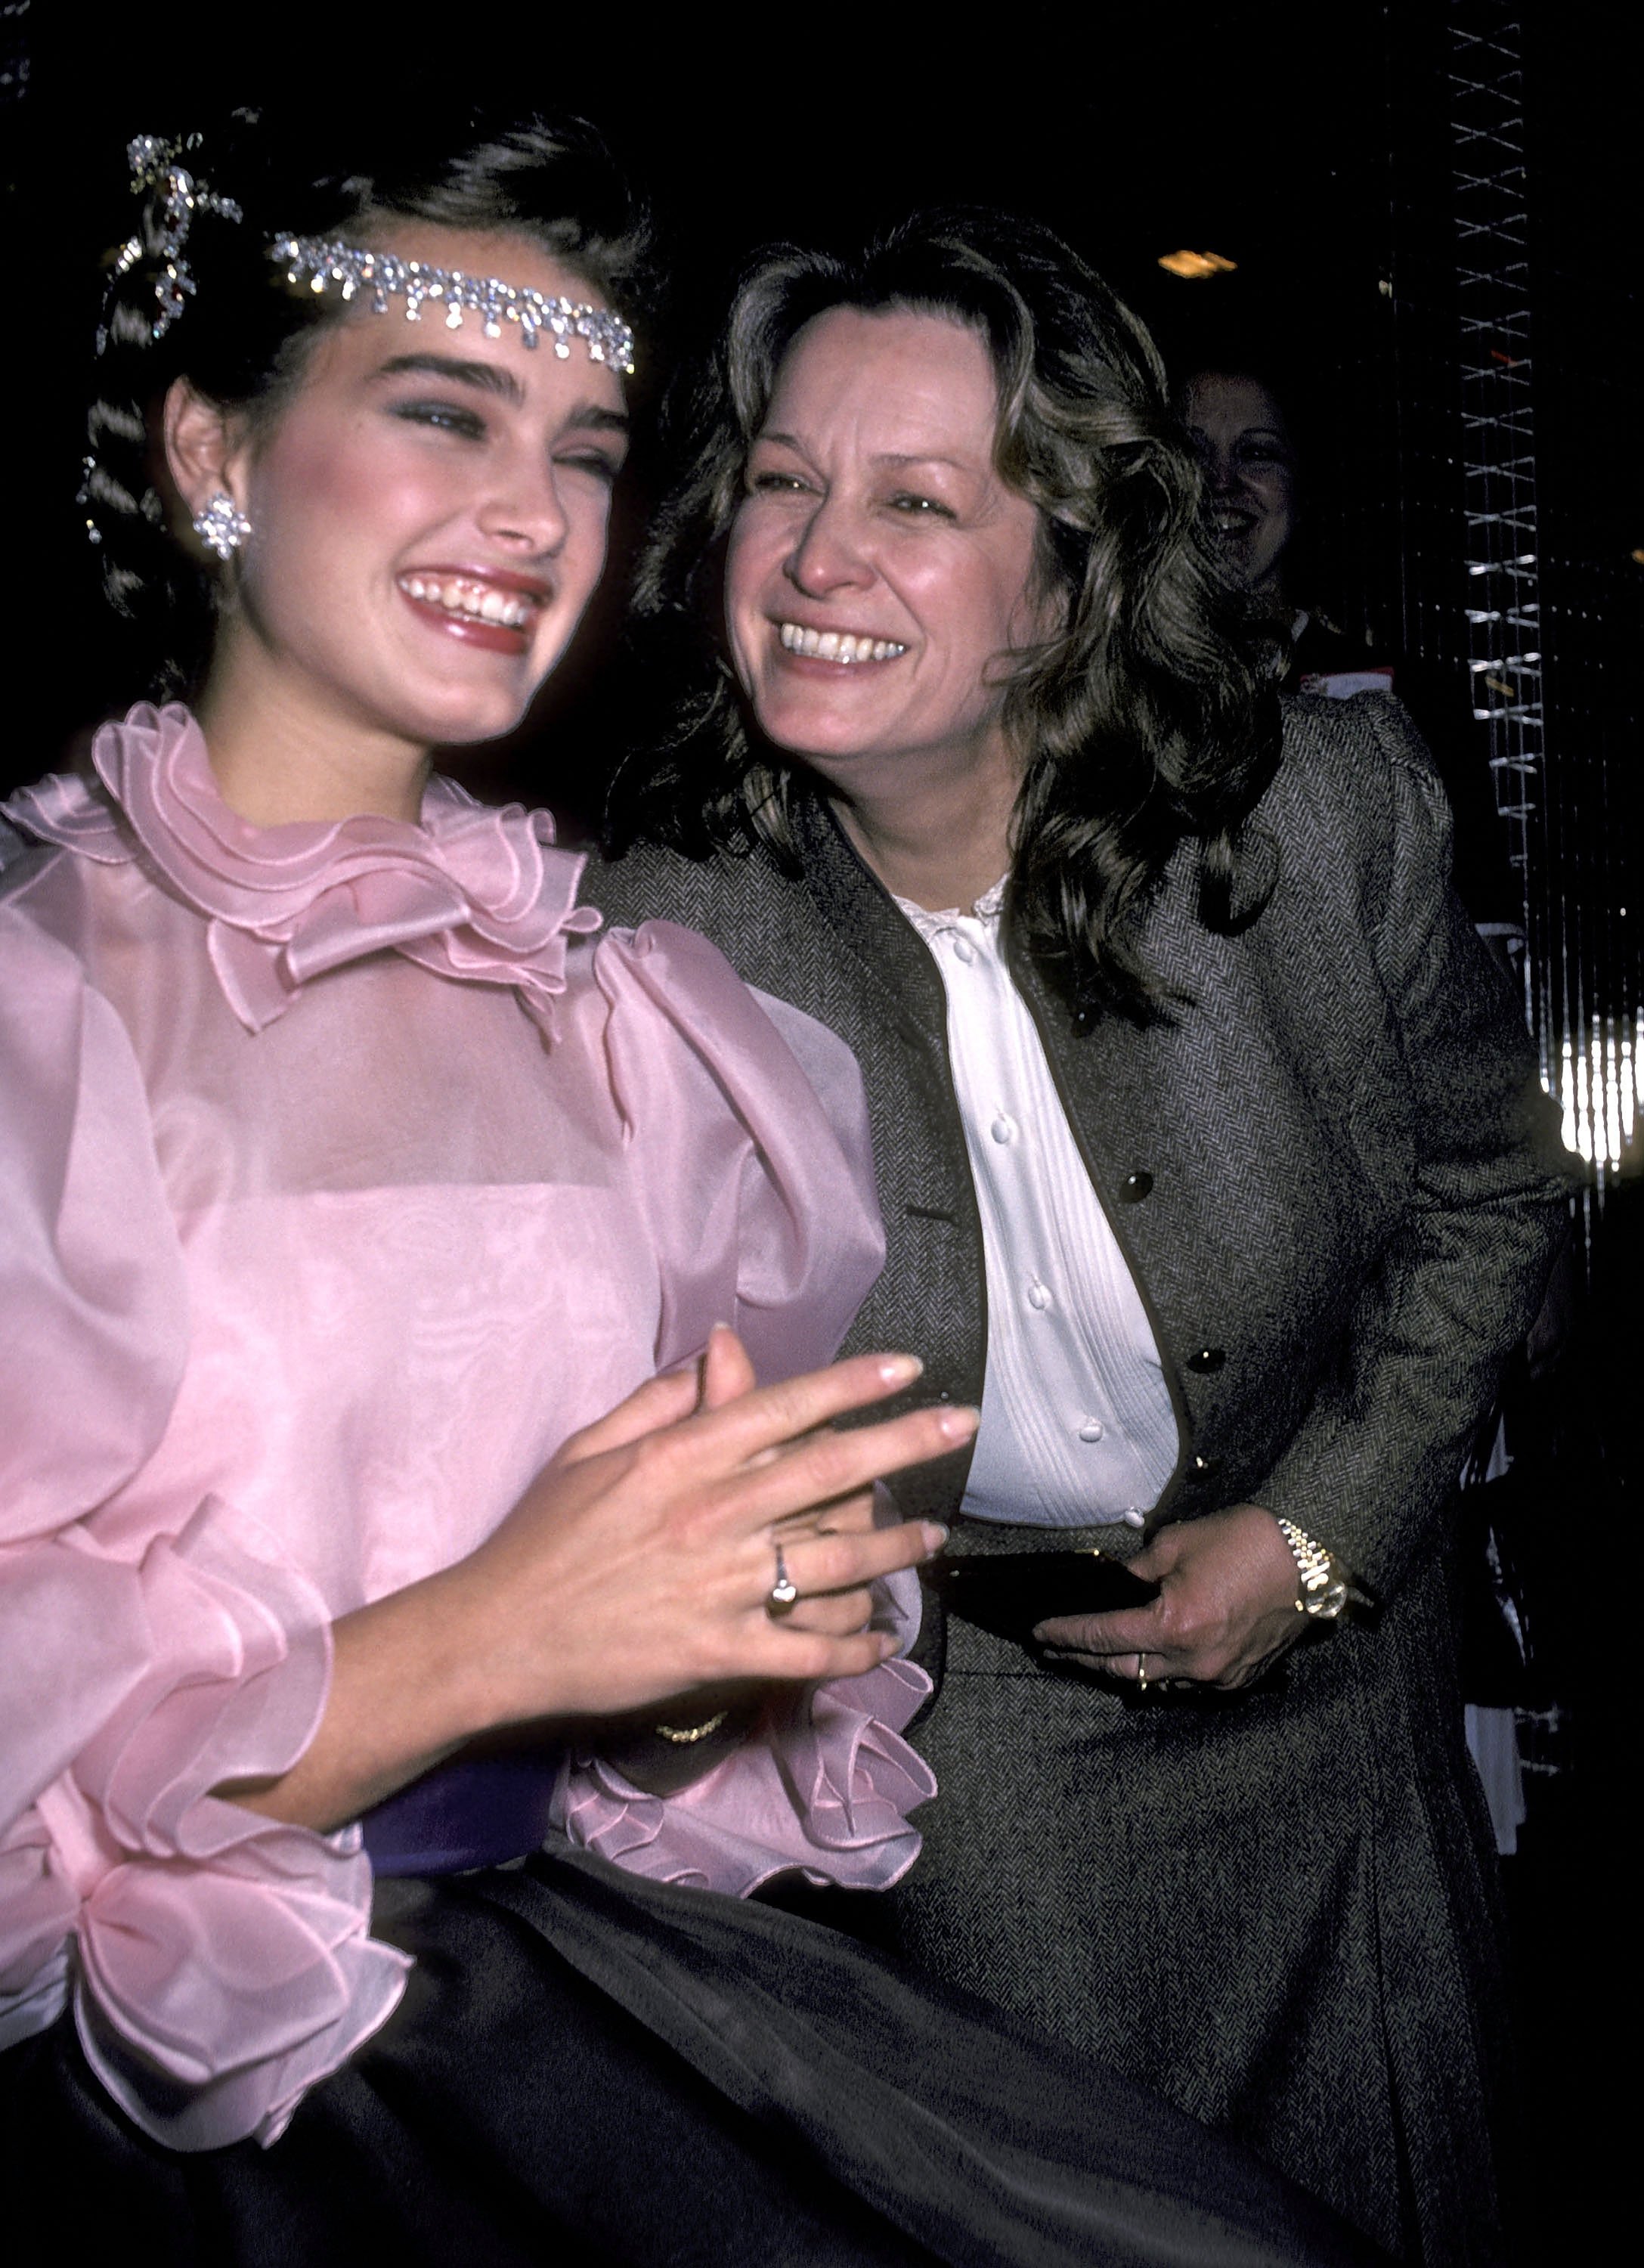 Brooke Shields and Teri Shields during the Press Party at Regine's on May 6, 1981 in New York City. / Source: Getty Images